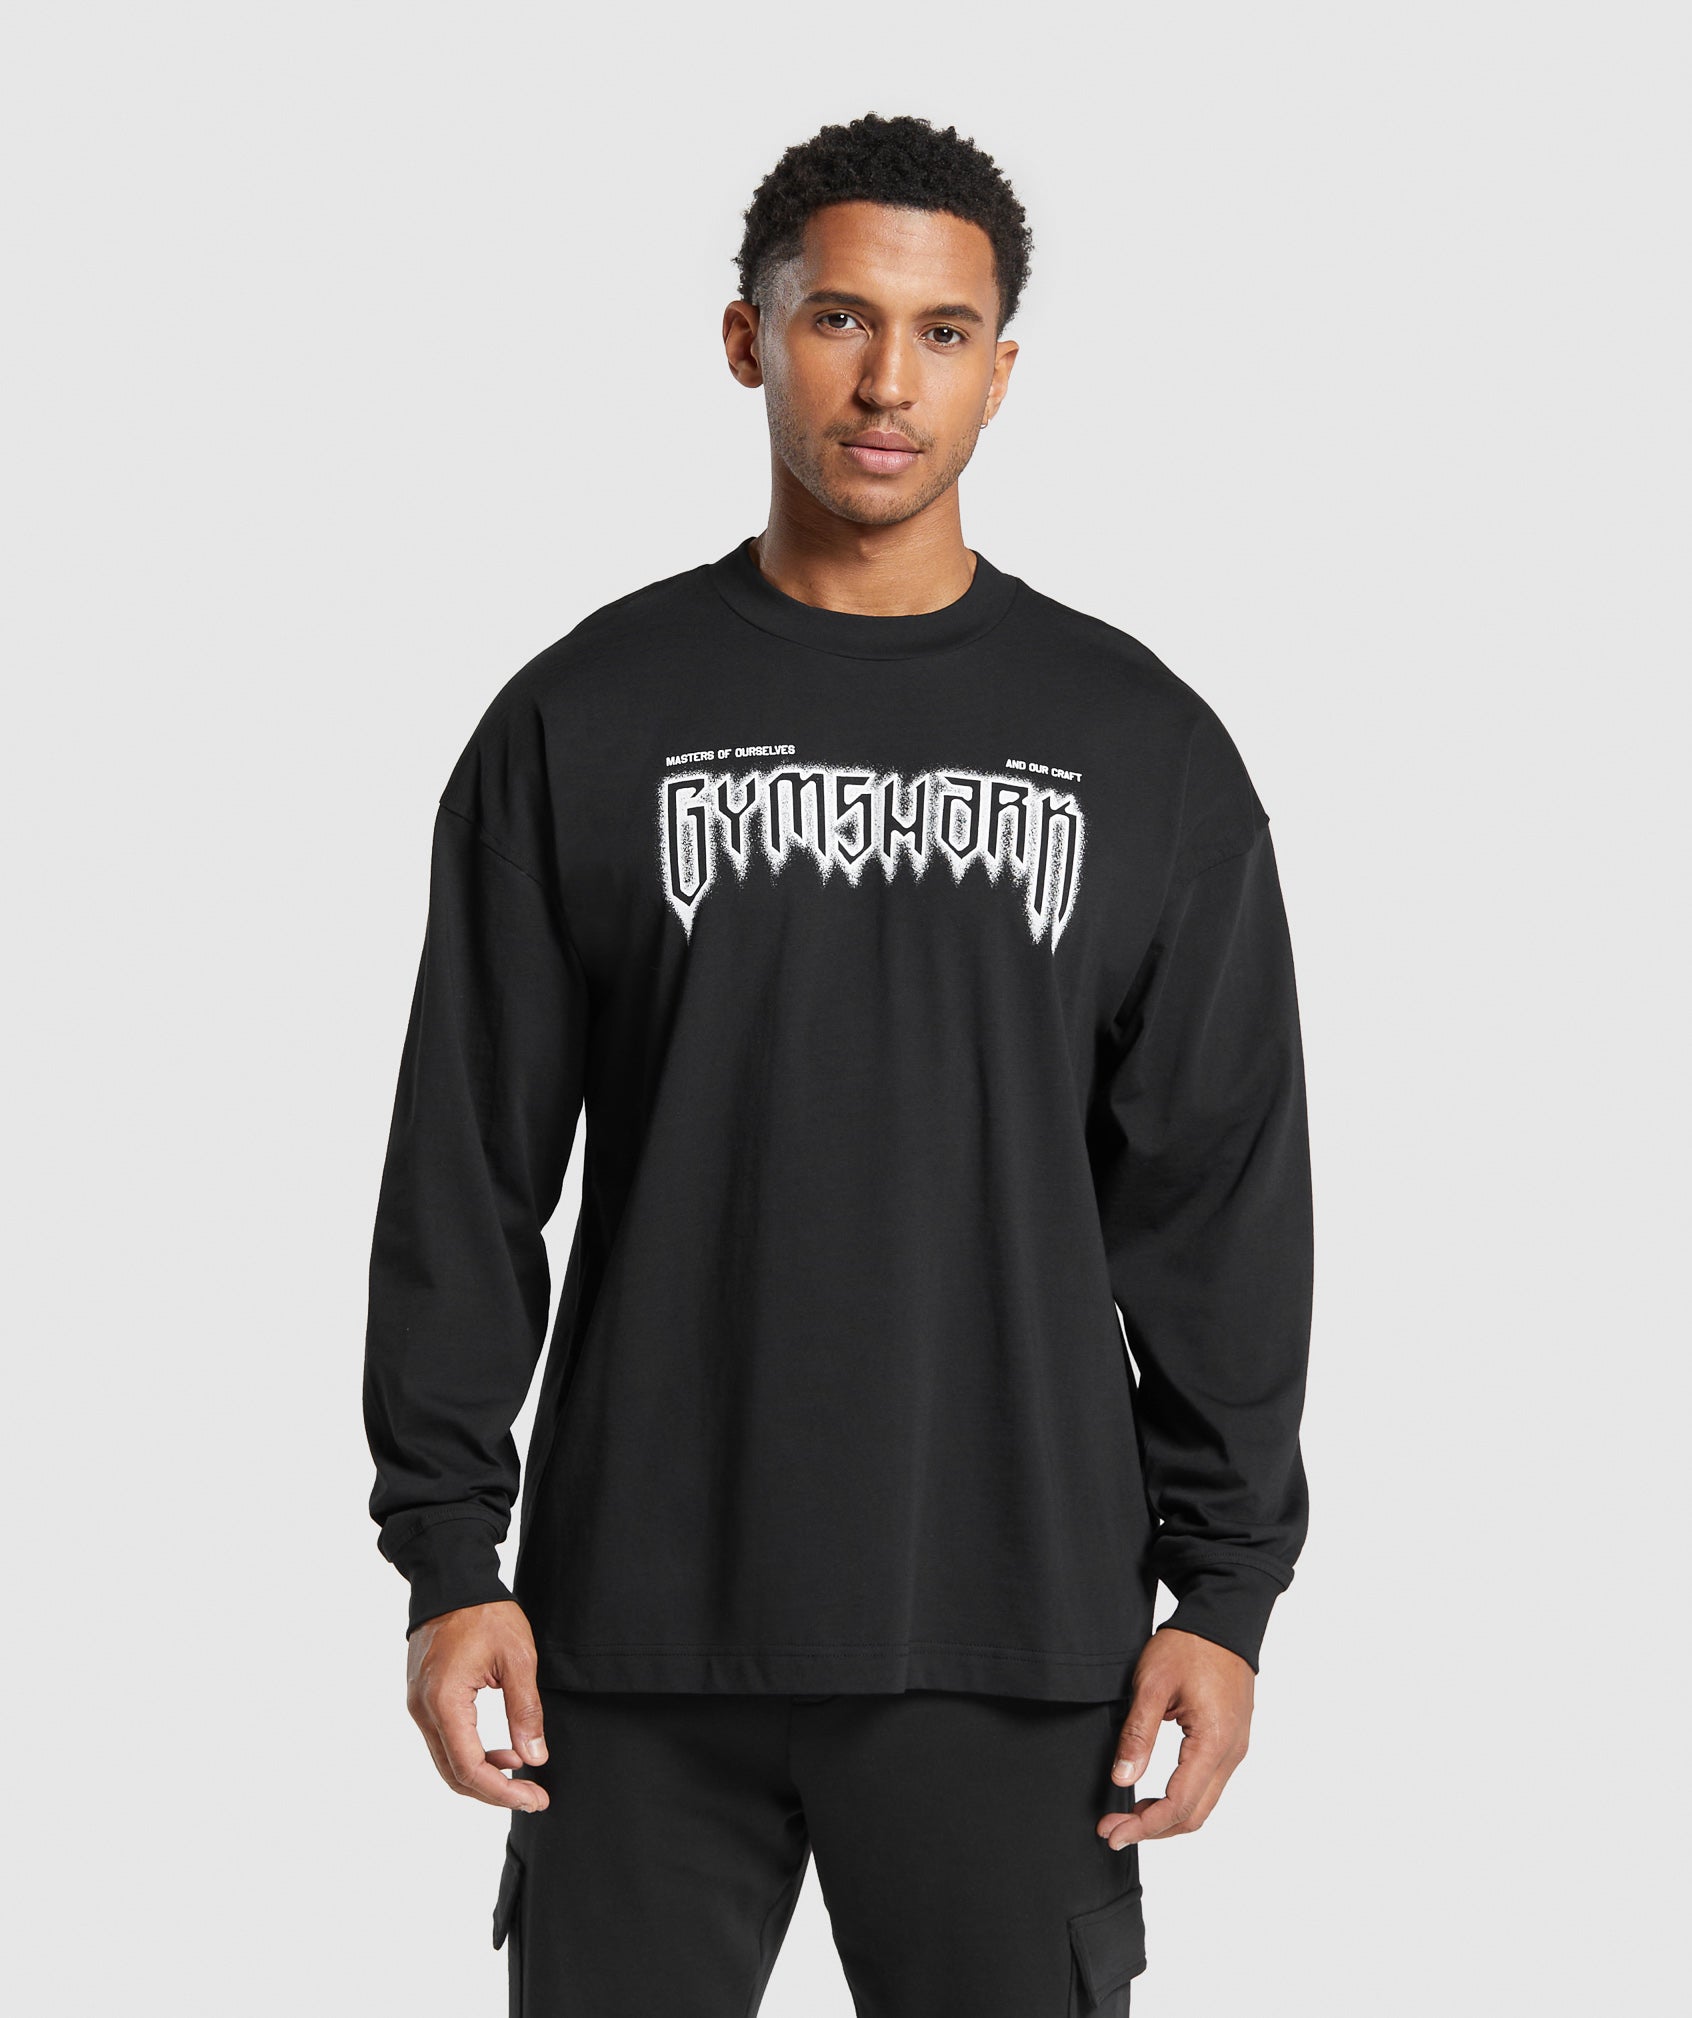 Masters of Our Craft Long Sleeve T-Shirt in Black - view 1